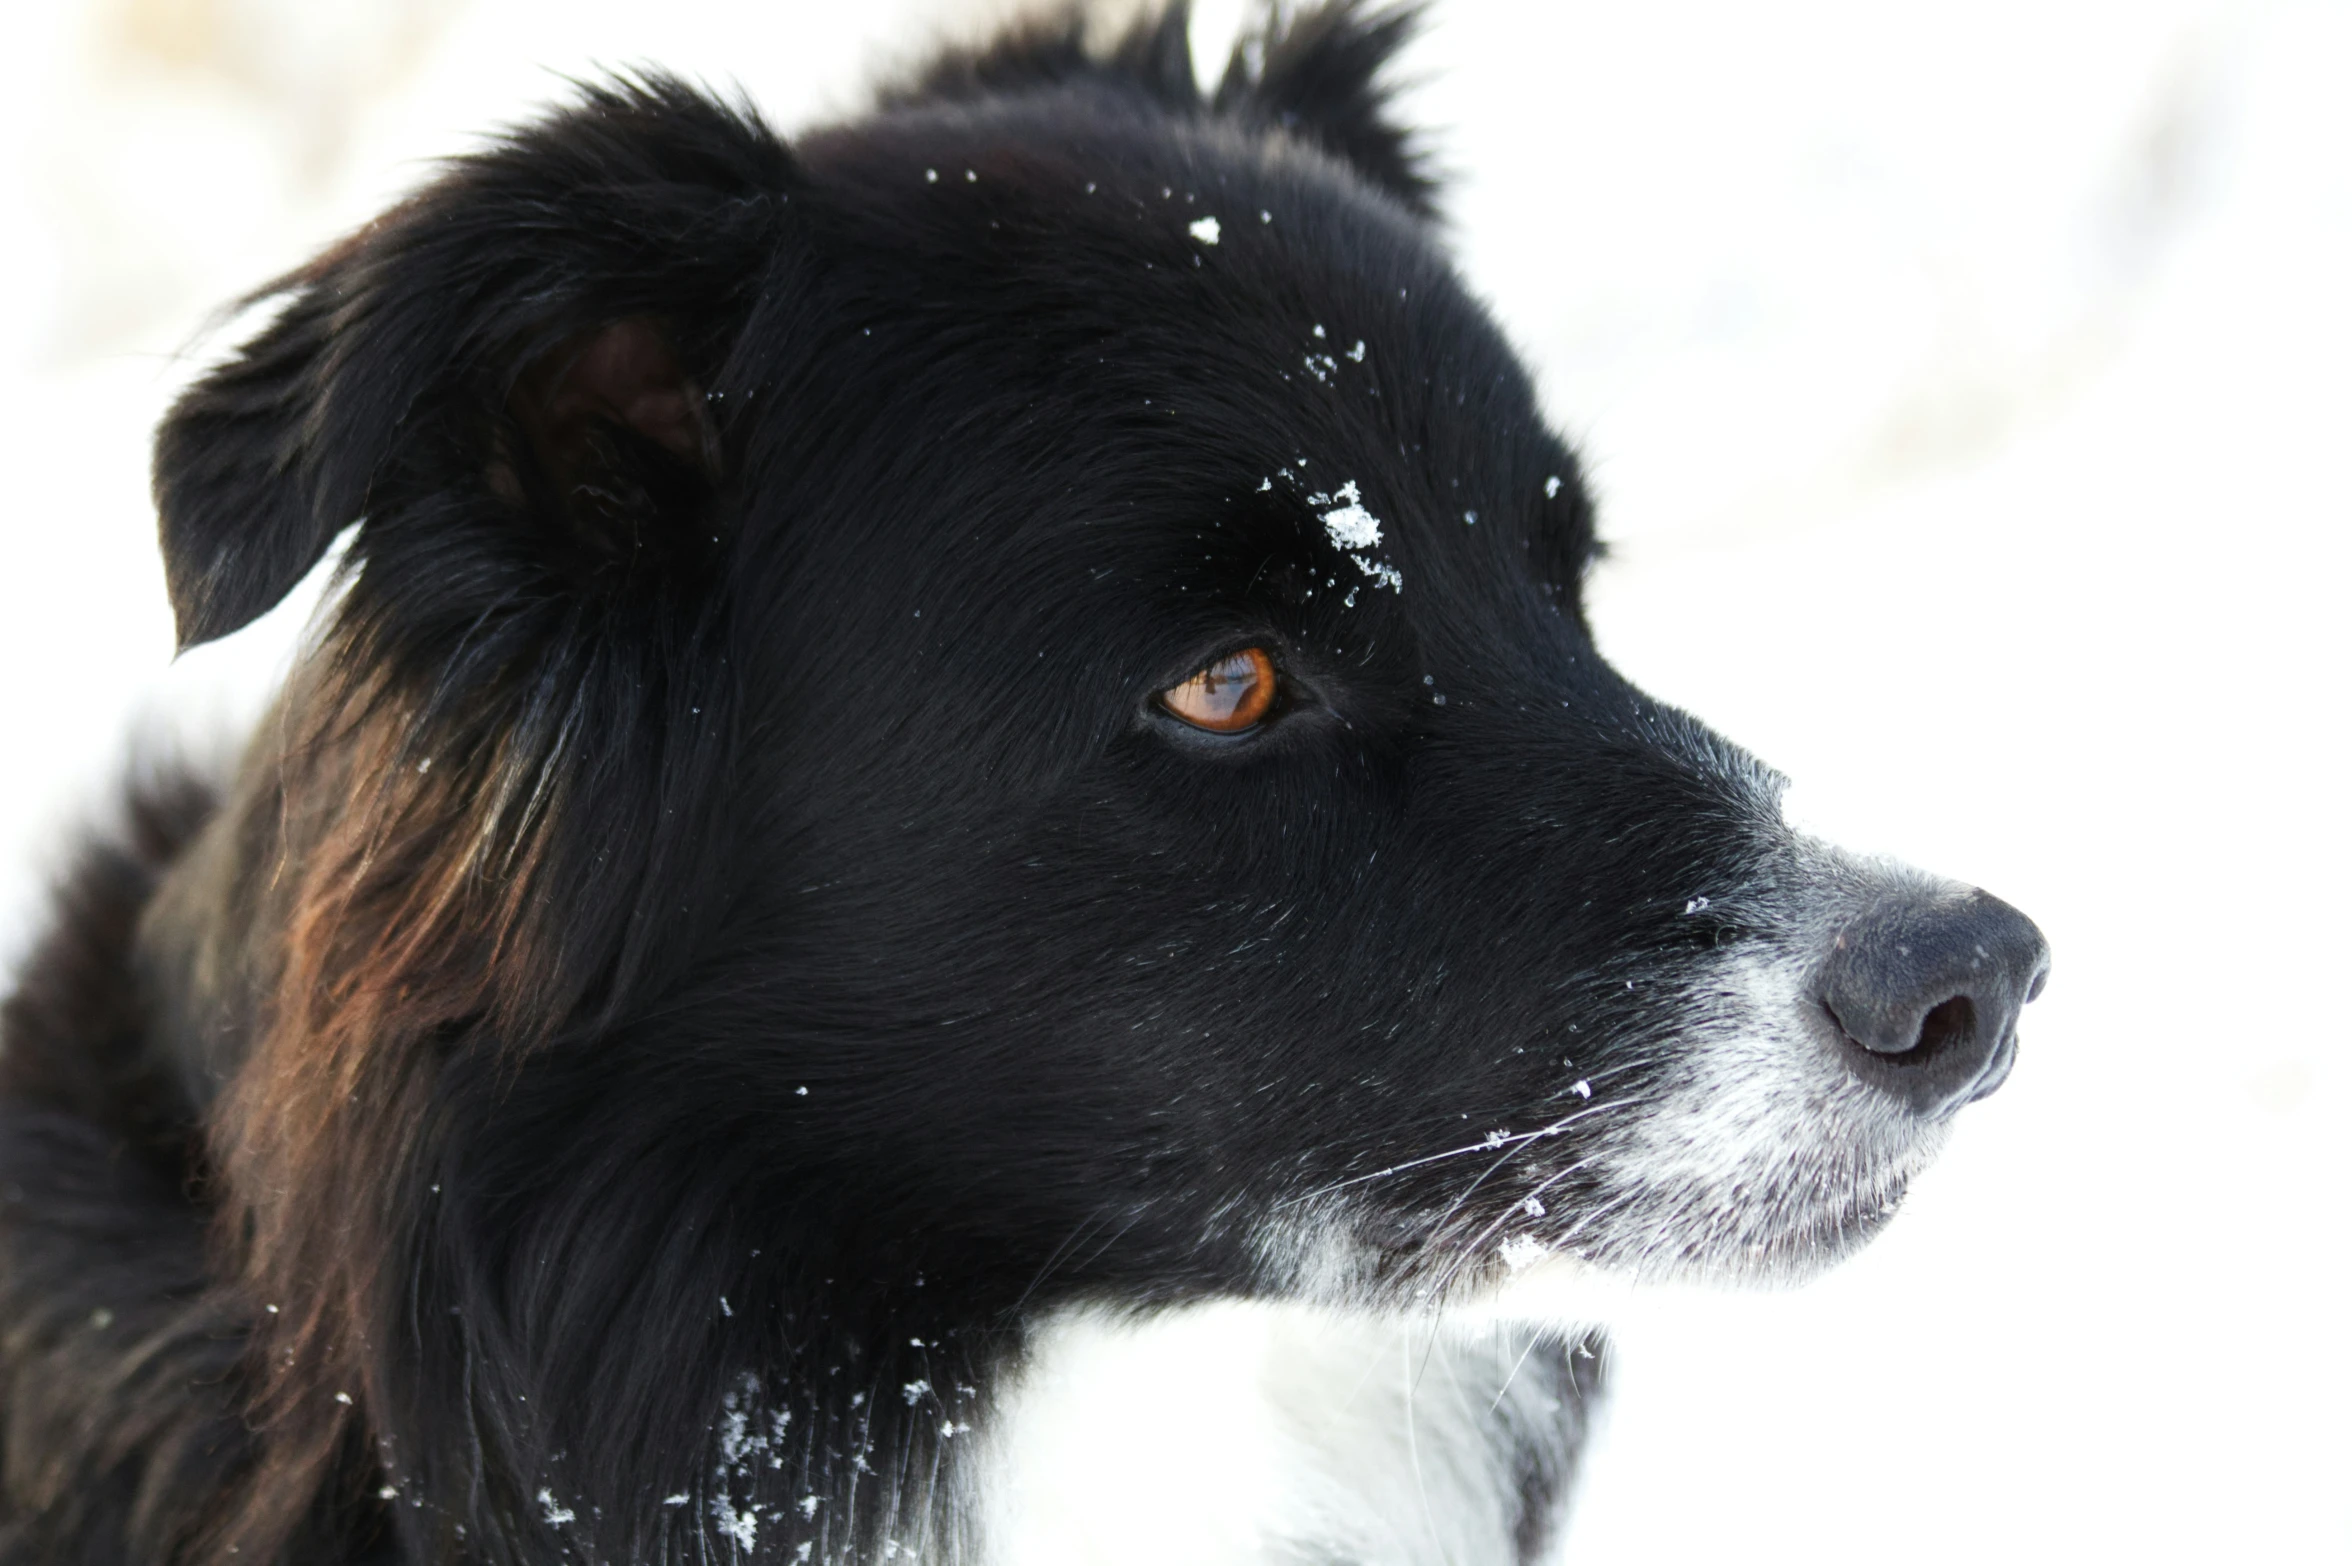 a black dog looks out into the snow